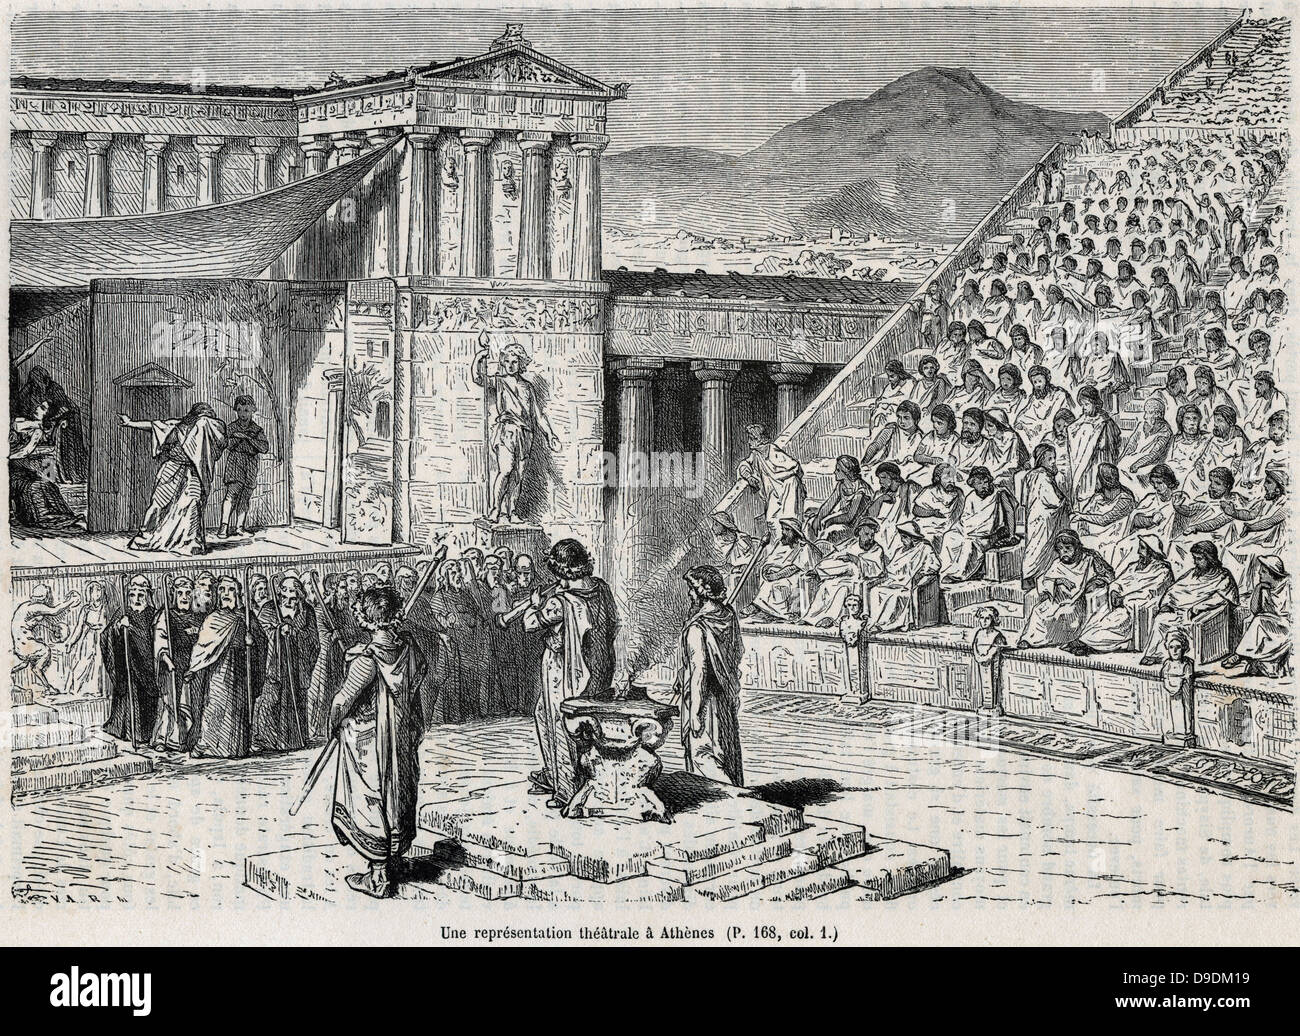 Artist's reconstruction of a theatrical performance in Ancient Greece. Chorus in front below raised stage. Engraved 1878. Stock Photo